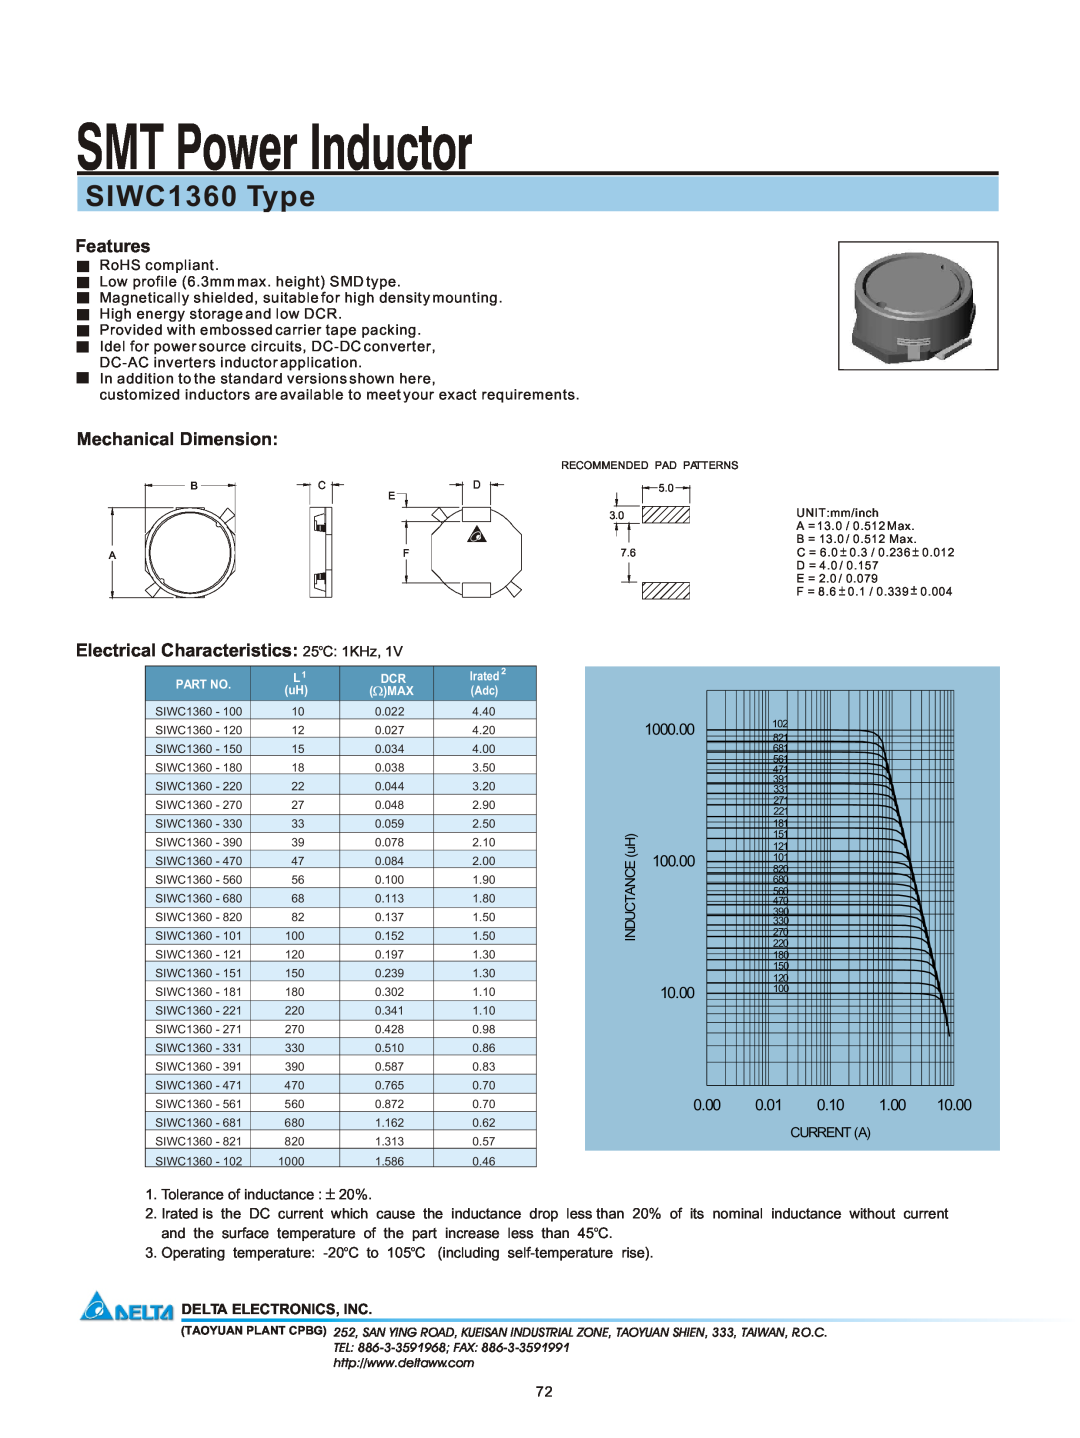 Delta Electronics manual SMT Power Inductor, SIWC1360 Type, Features, Mechanical Dimension, 100.00, 0.00 0.01 0.10 1.00 